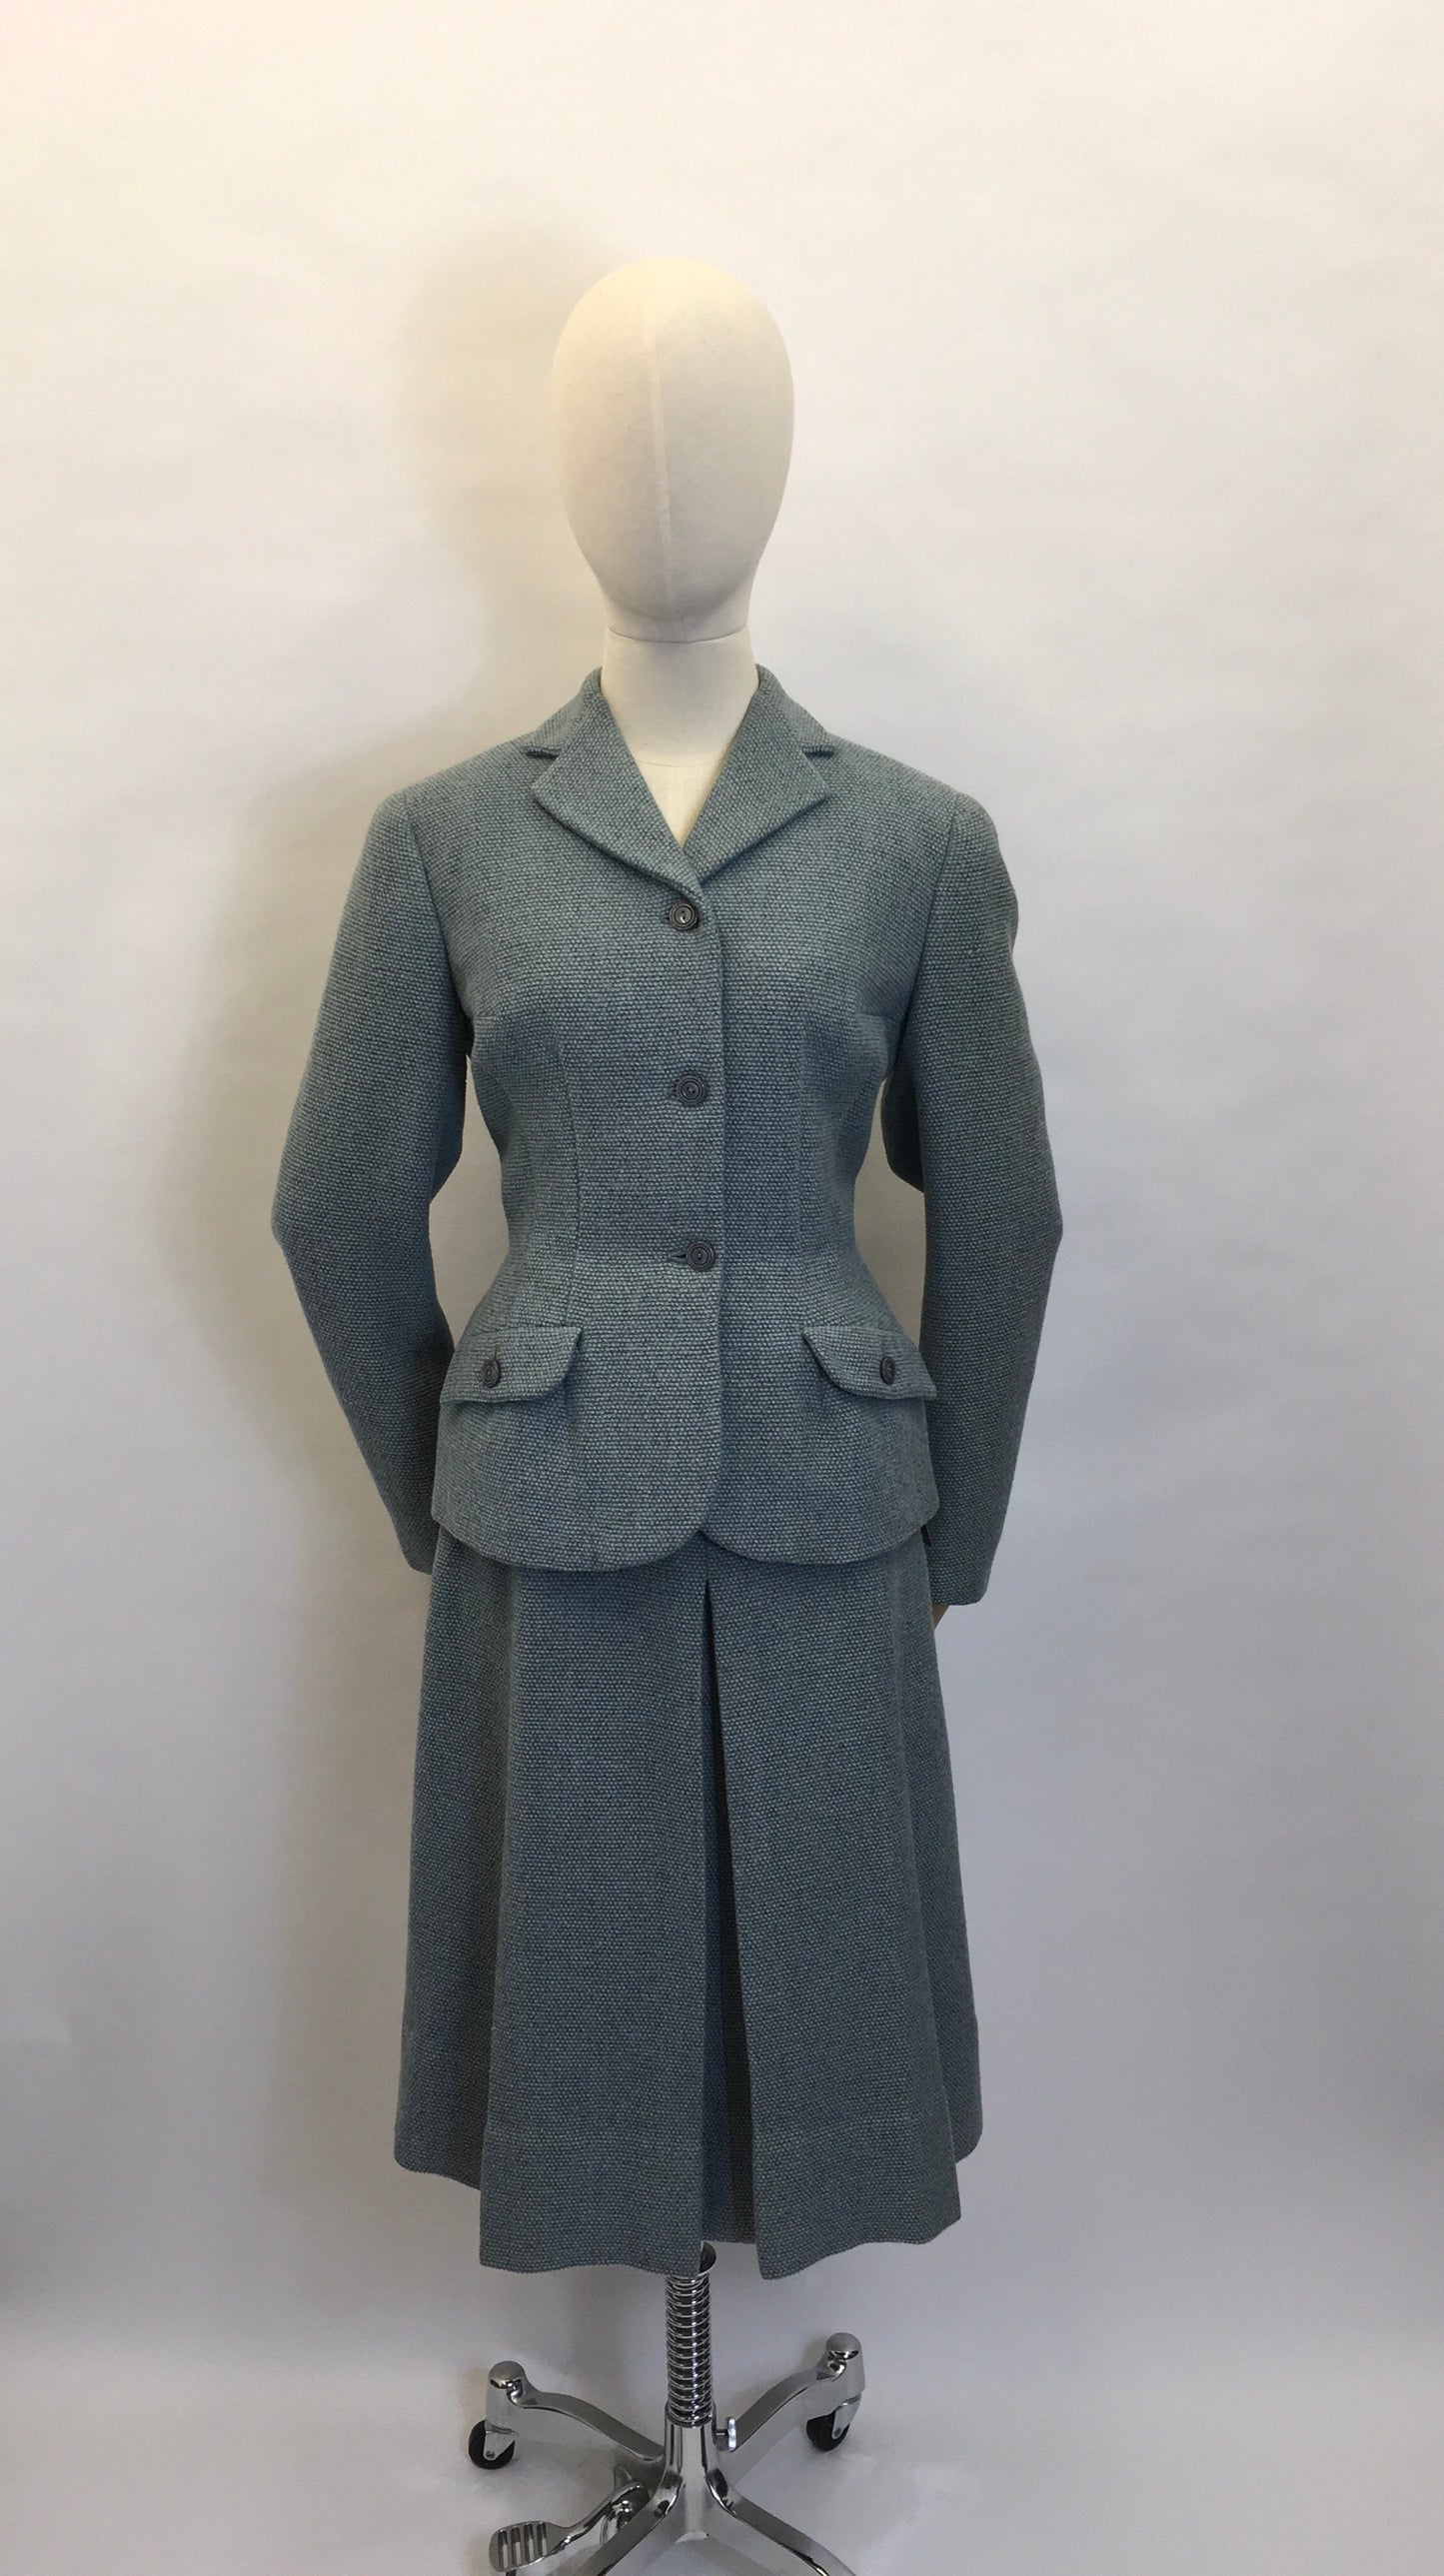 Original 1940’s ‘ Hebe Sports Suit’ - In a Timeless & Classic Powder Blue